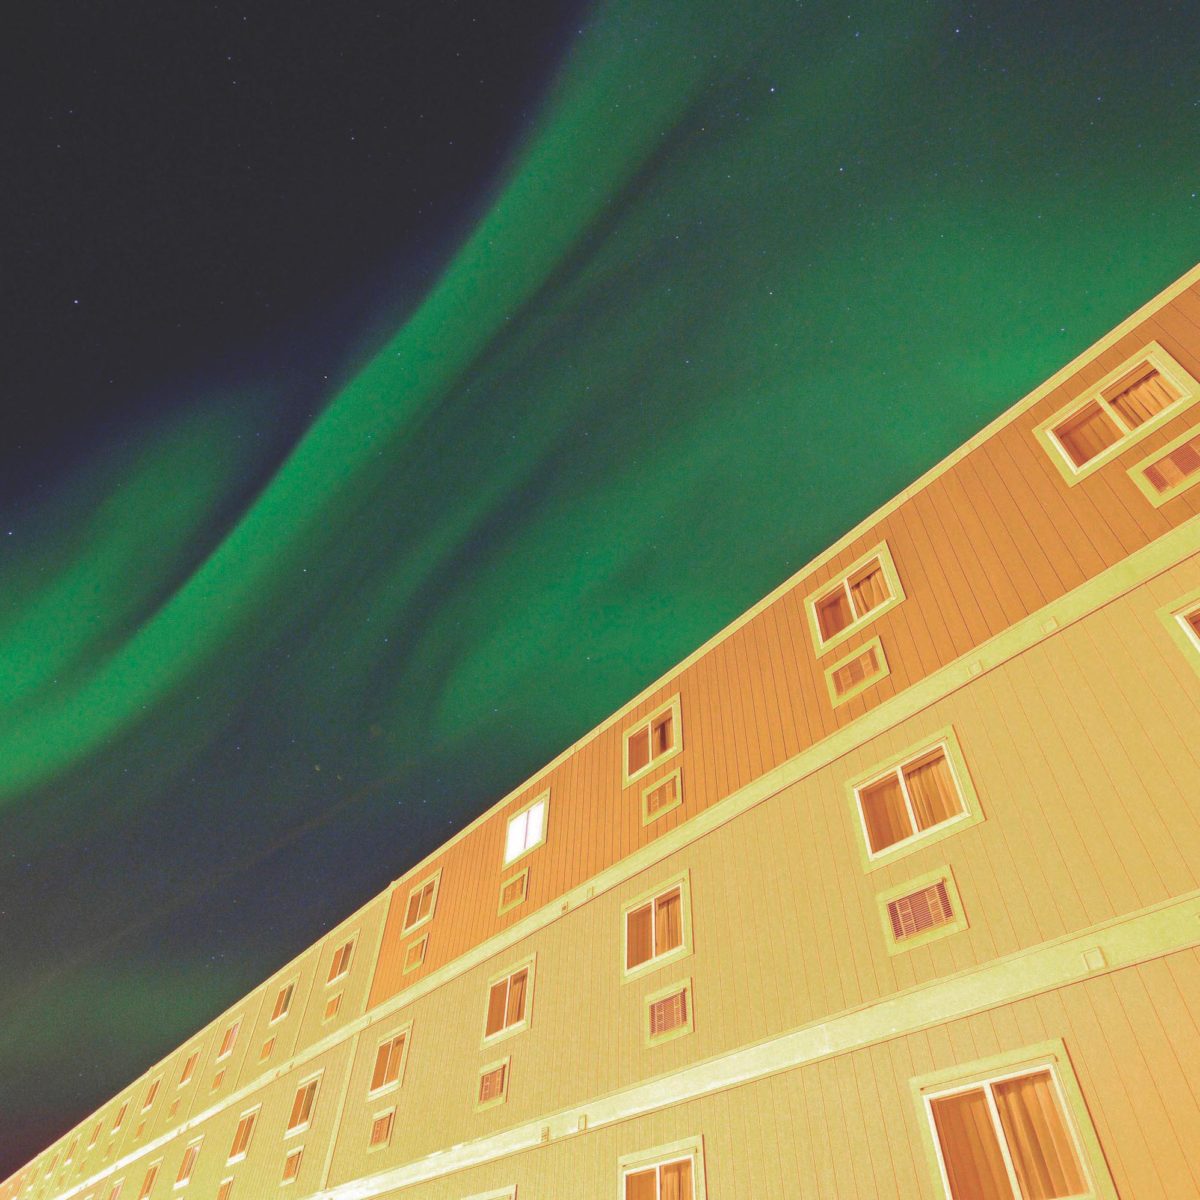 Northern Lights above a workforce accommodations village in the arctic